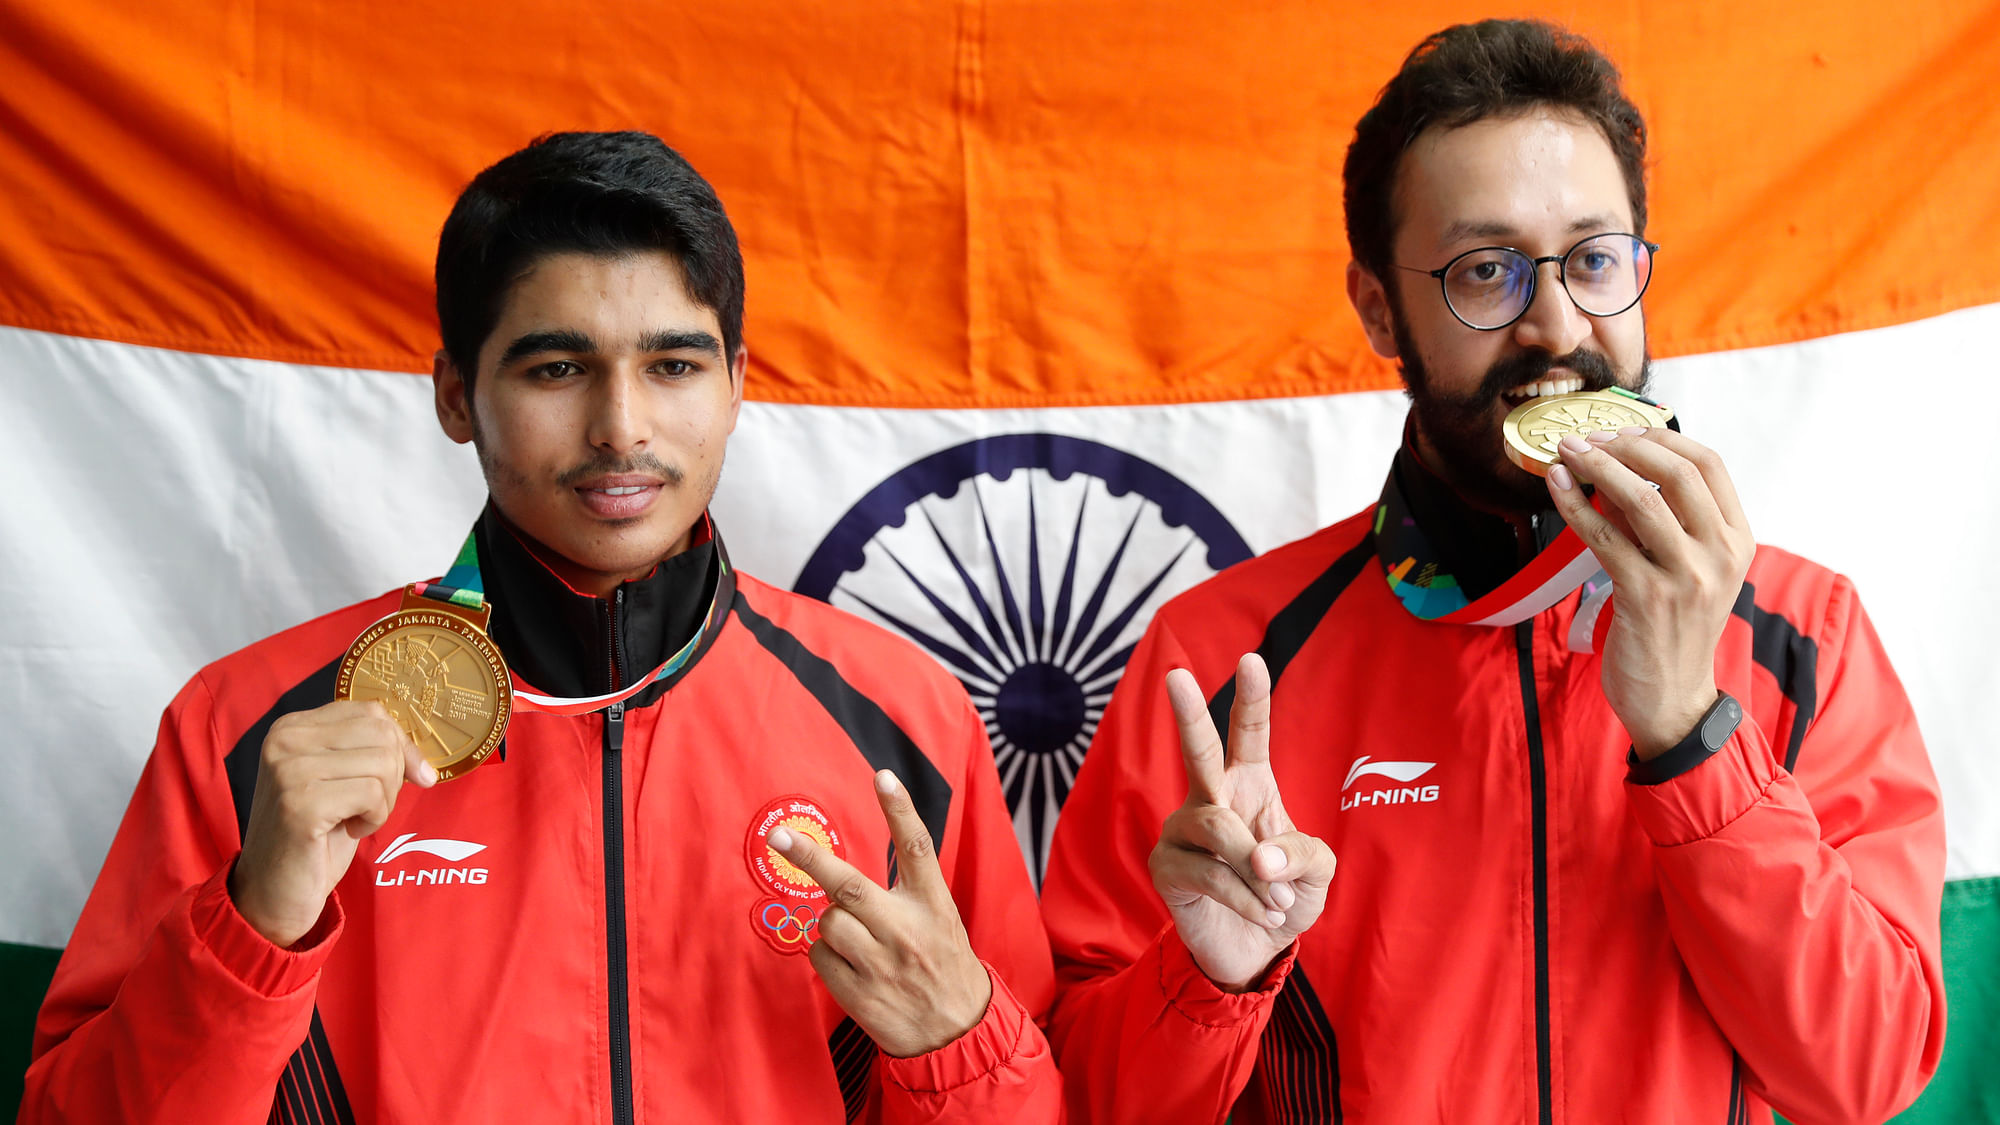 Bonze medalist India’s Abhishek Verma, right, and gold medalist India’s Saurabh Chaudhary, poses for photographer with India national flag after the 10m air pistol men’s final shooting event during the 18th Asian Games.